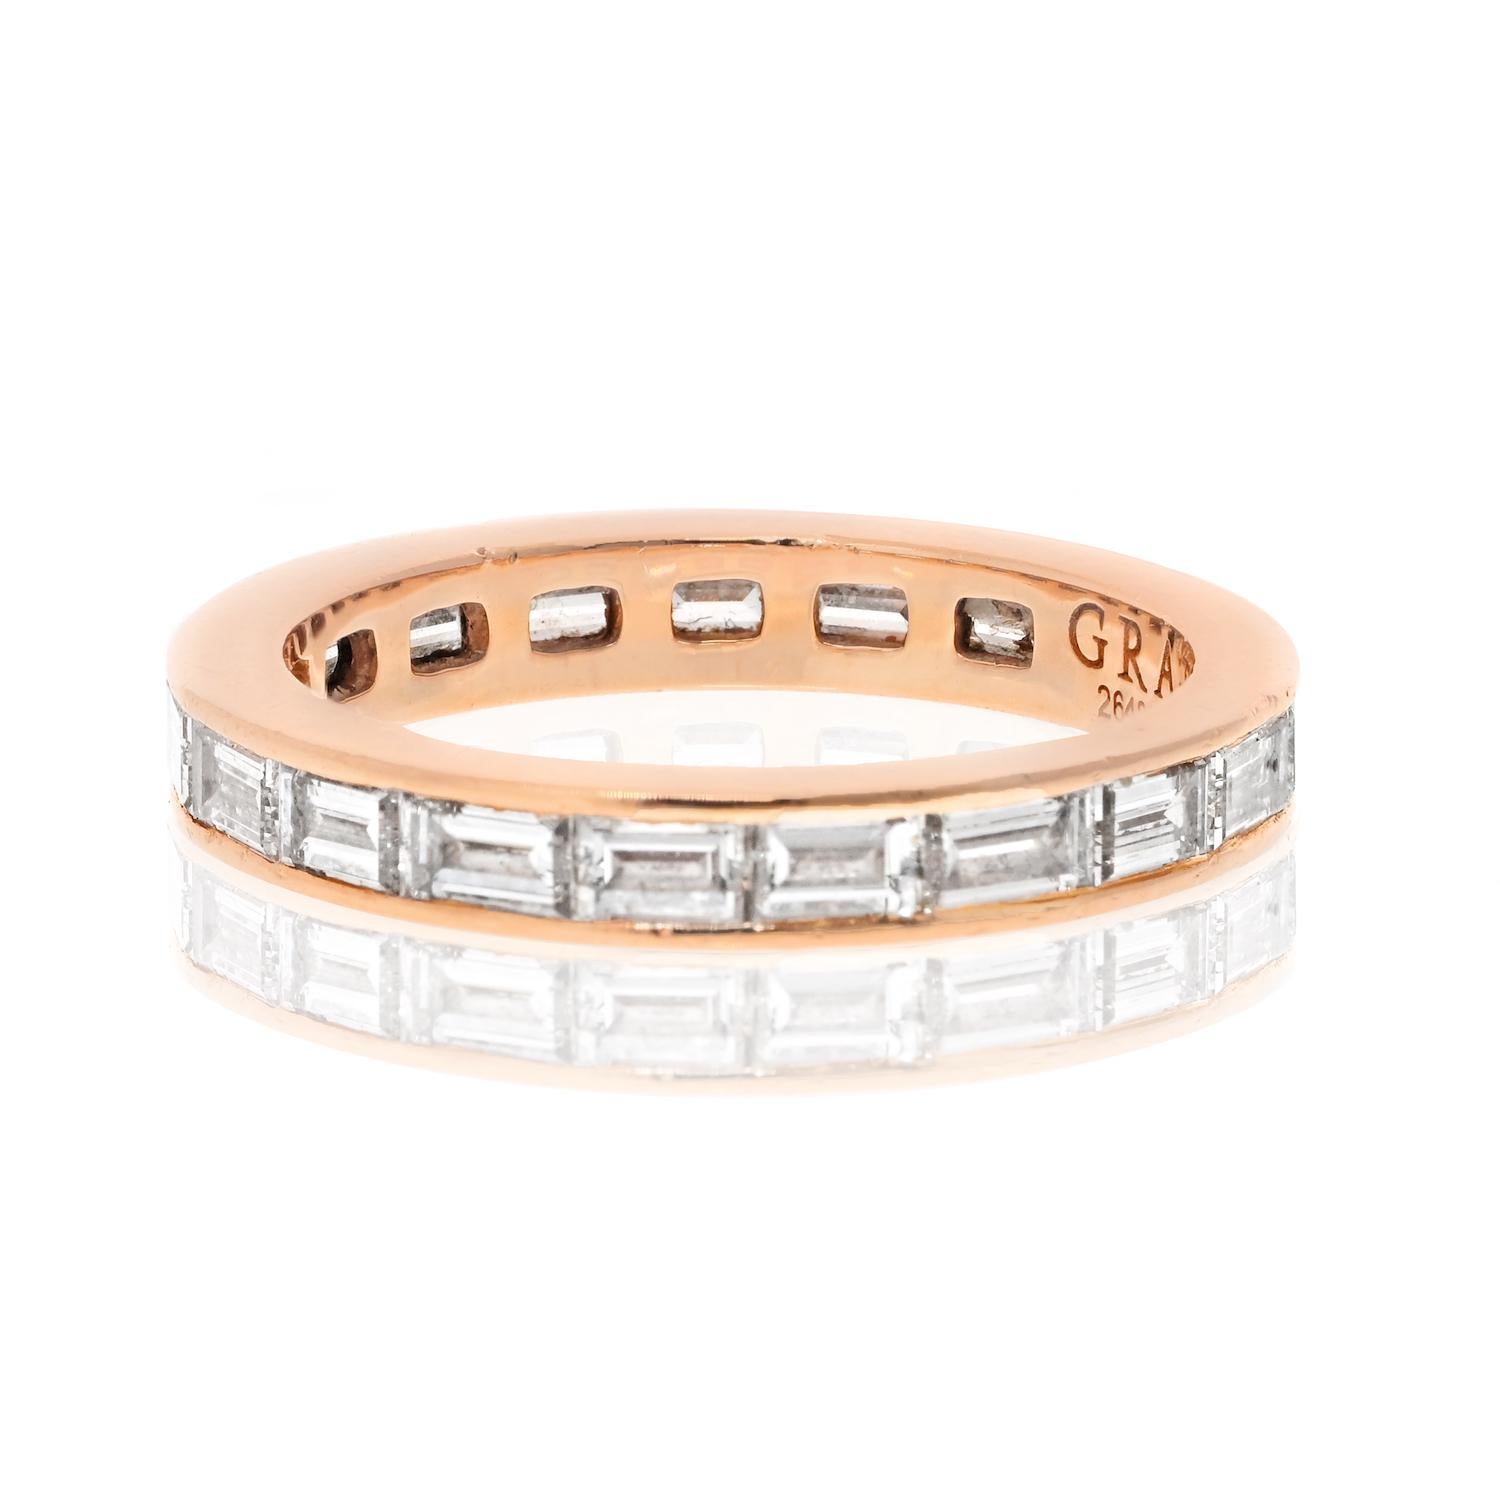 The Graff 18K Rose Gold Baguette Diamond Eternity Band is a stunning piece of jewelry that exudes elegance and luxury. 

This eternity band is crafted with 18K rose gold and features channel-set baguette cut diamonds that are placed horizontally